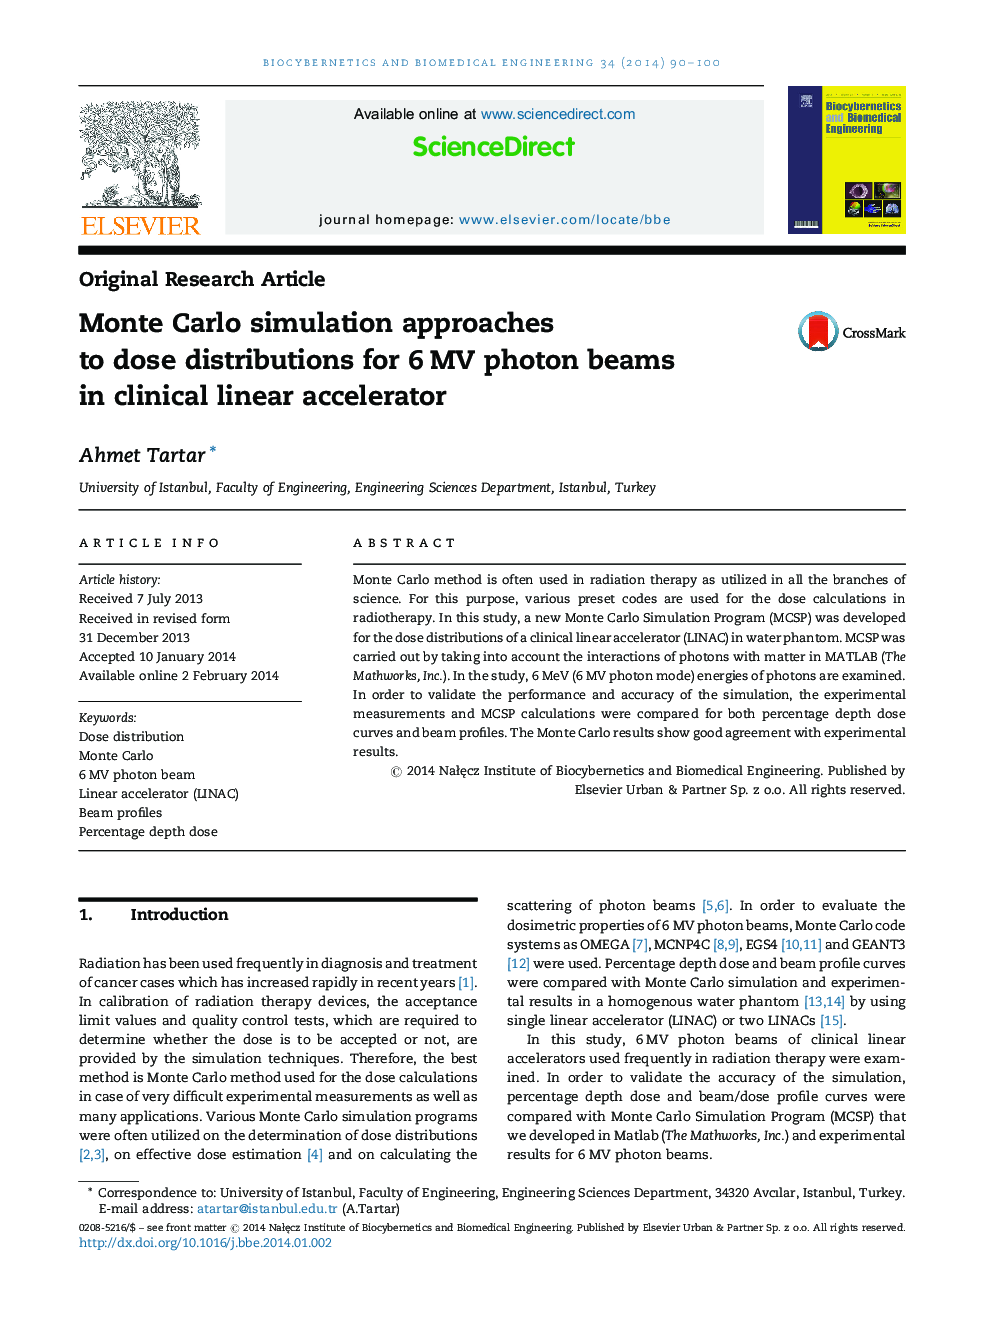 Monte Carlo simulation approaches to dose distributions for 6 MV photon beams in clinical linear accelerator